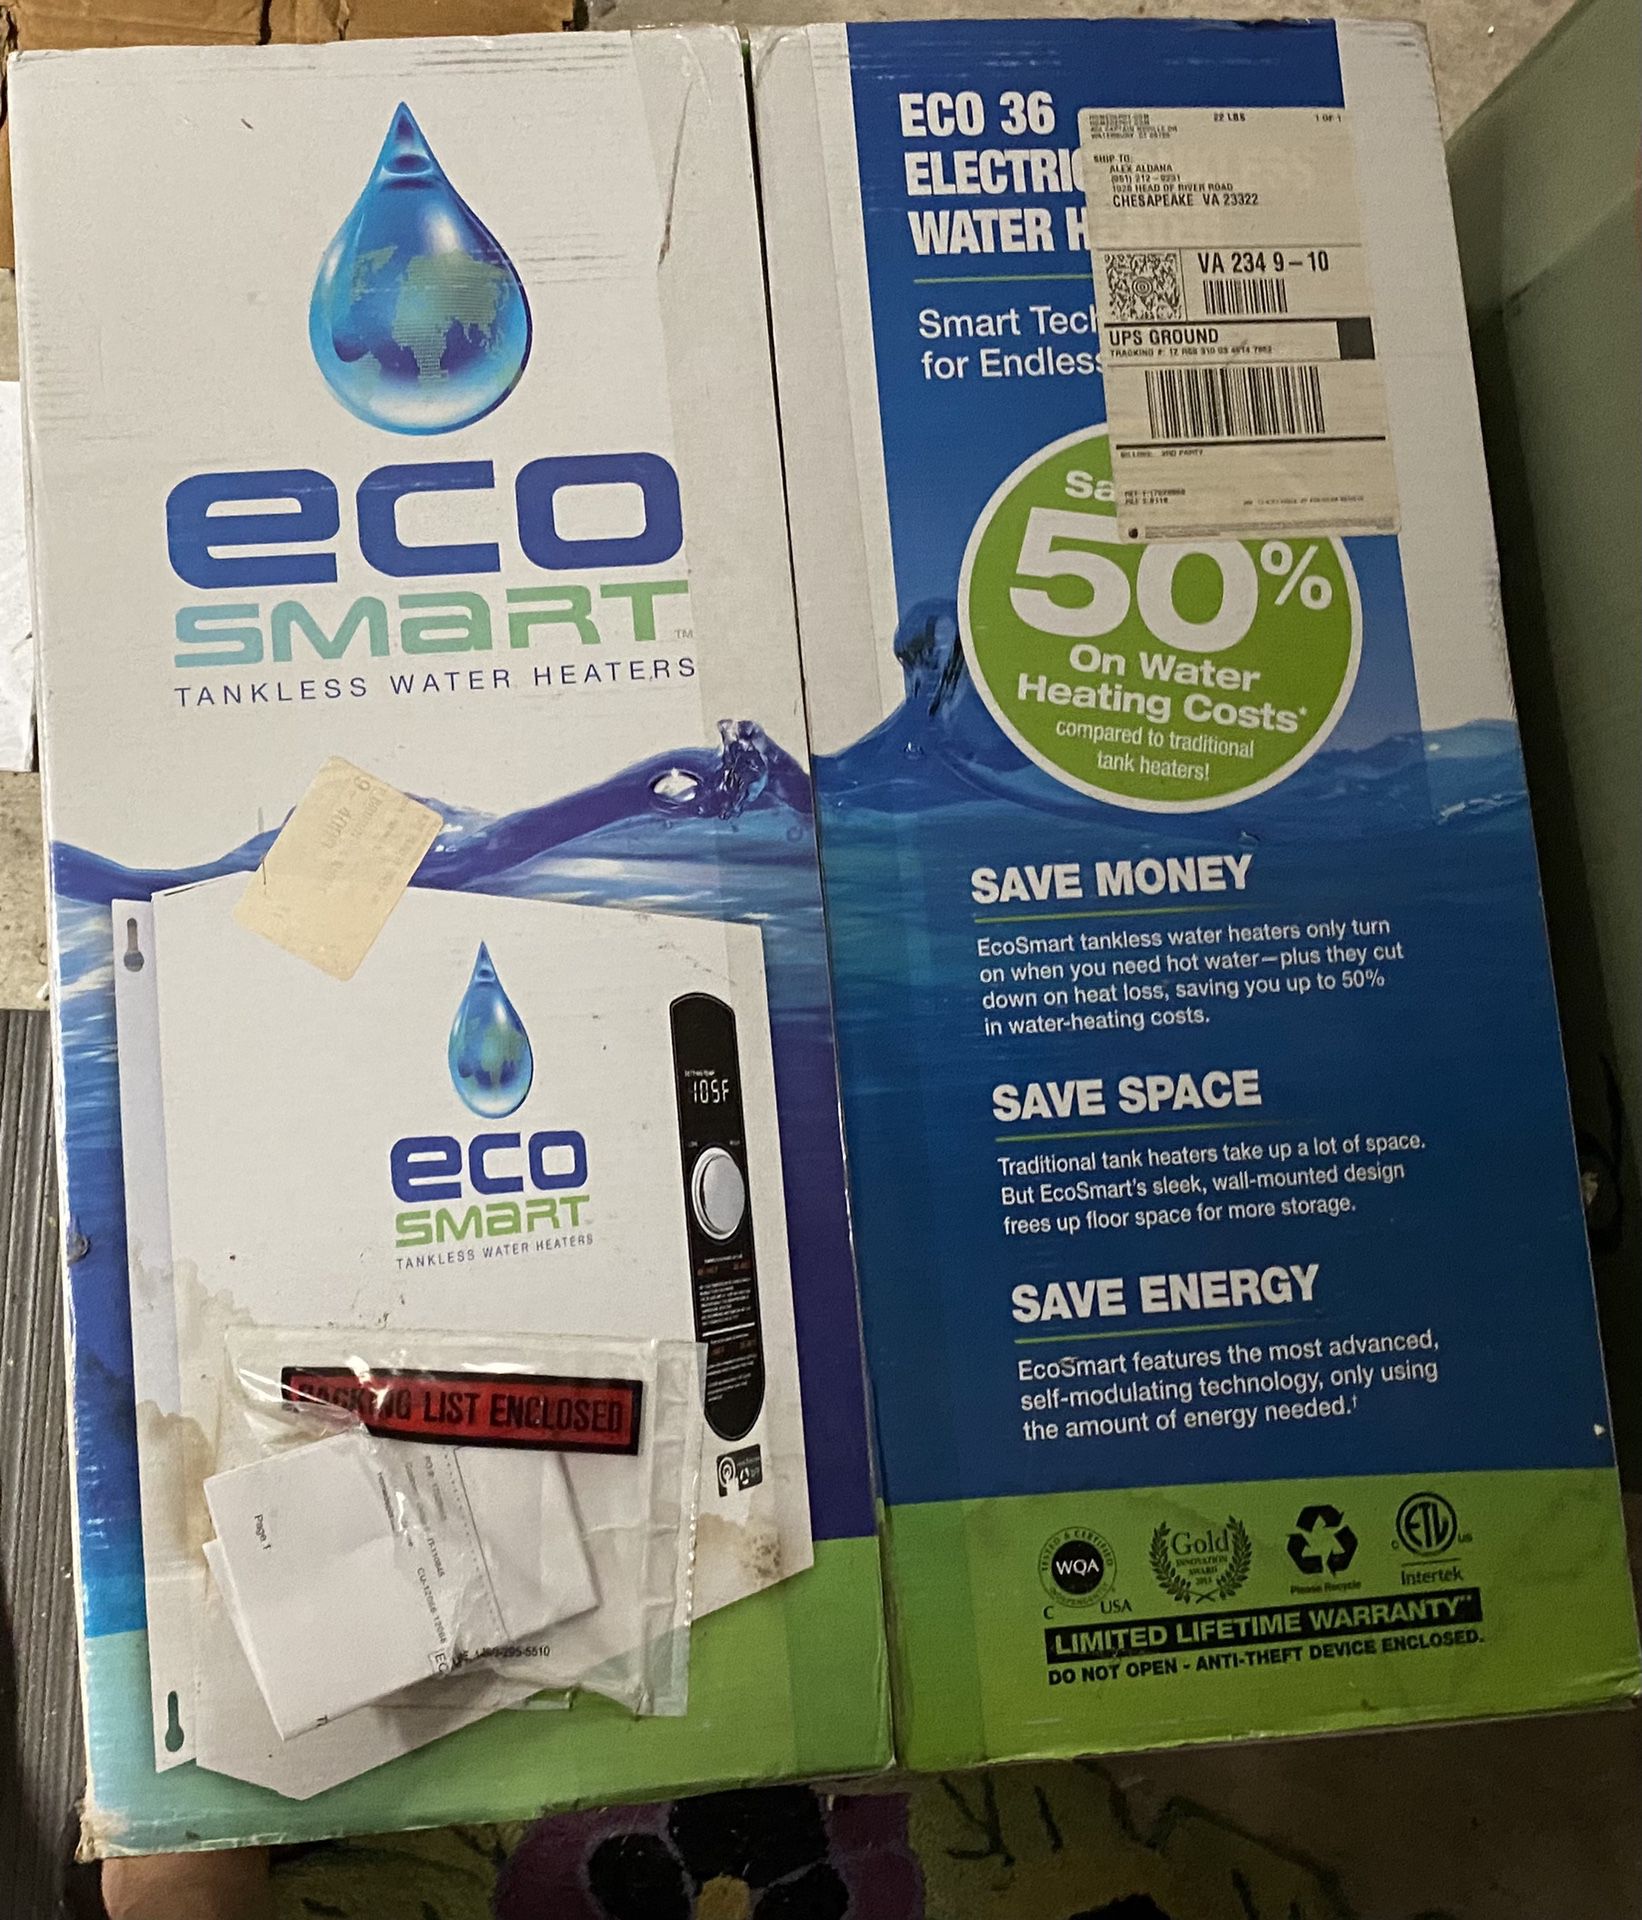 EcoSmart 36 electric tankless water heater.